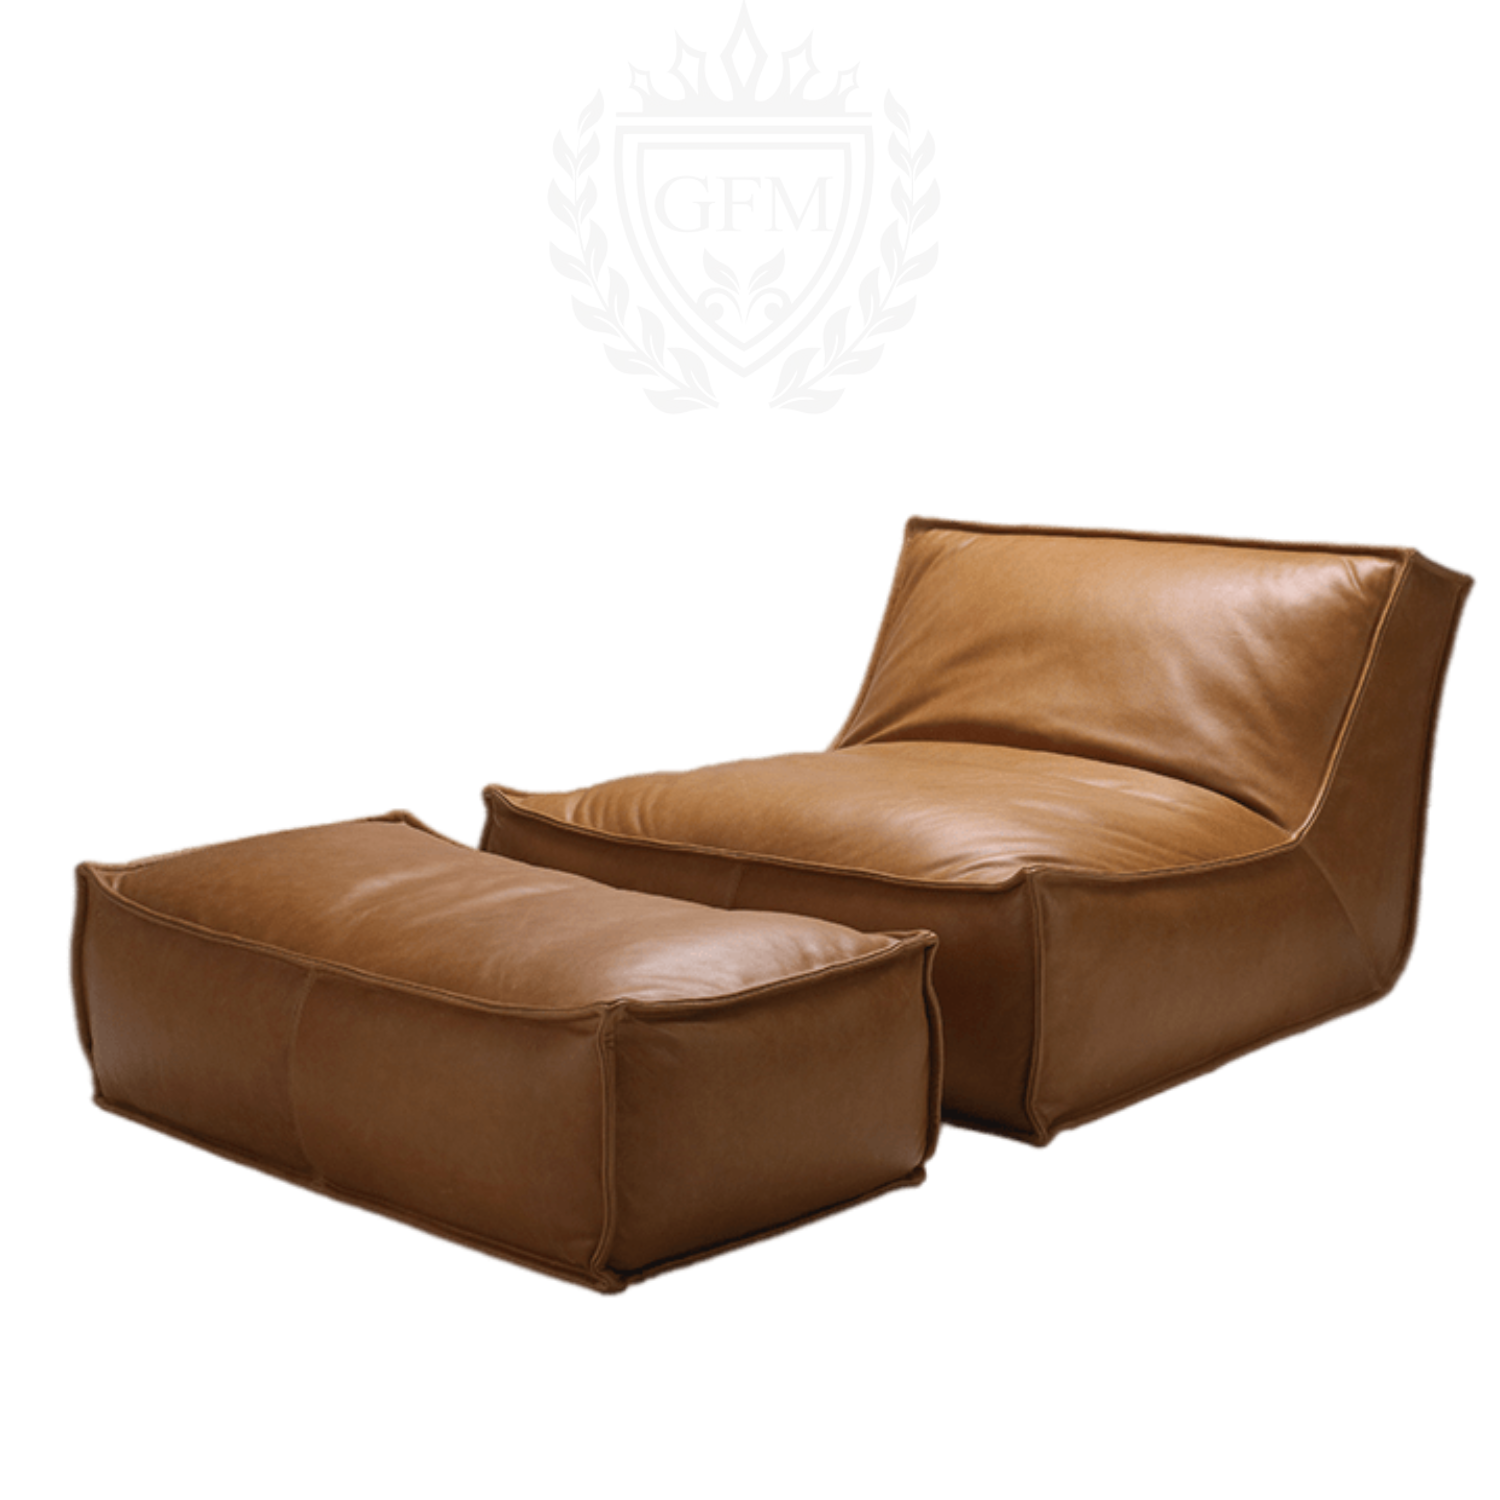 Boho Chic Armless Sofa with Square Ottoman - Handcrafted Leather Lounger